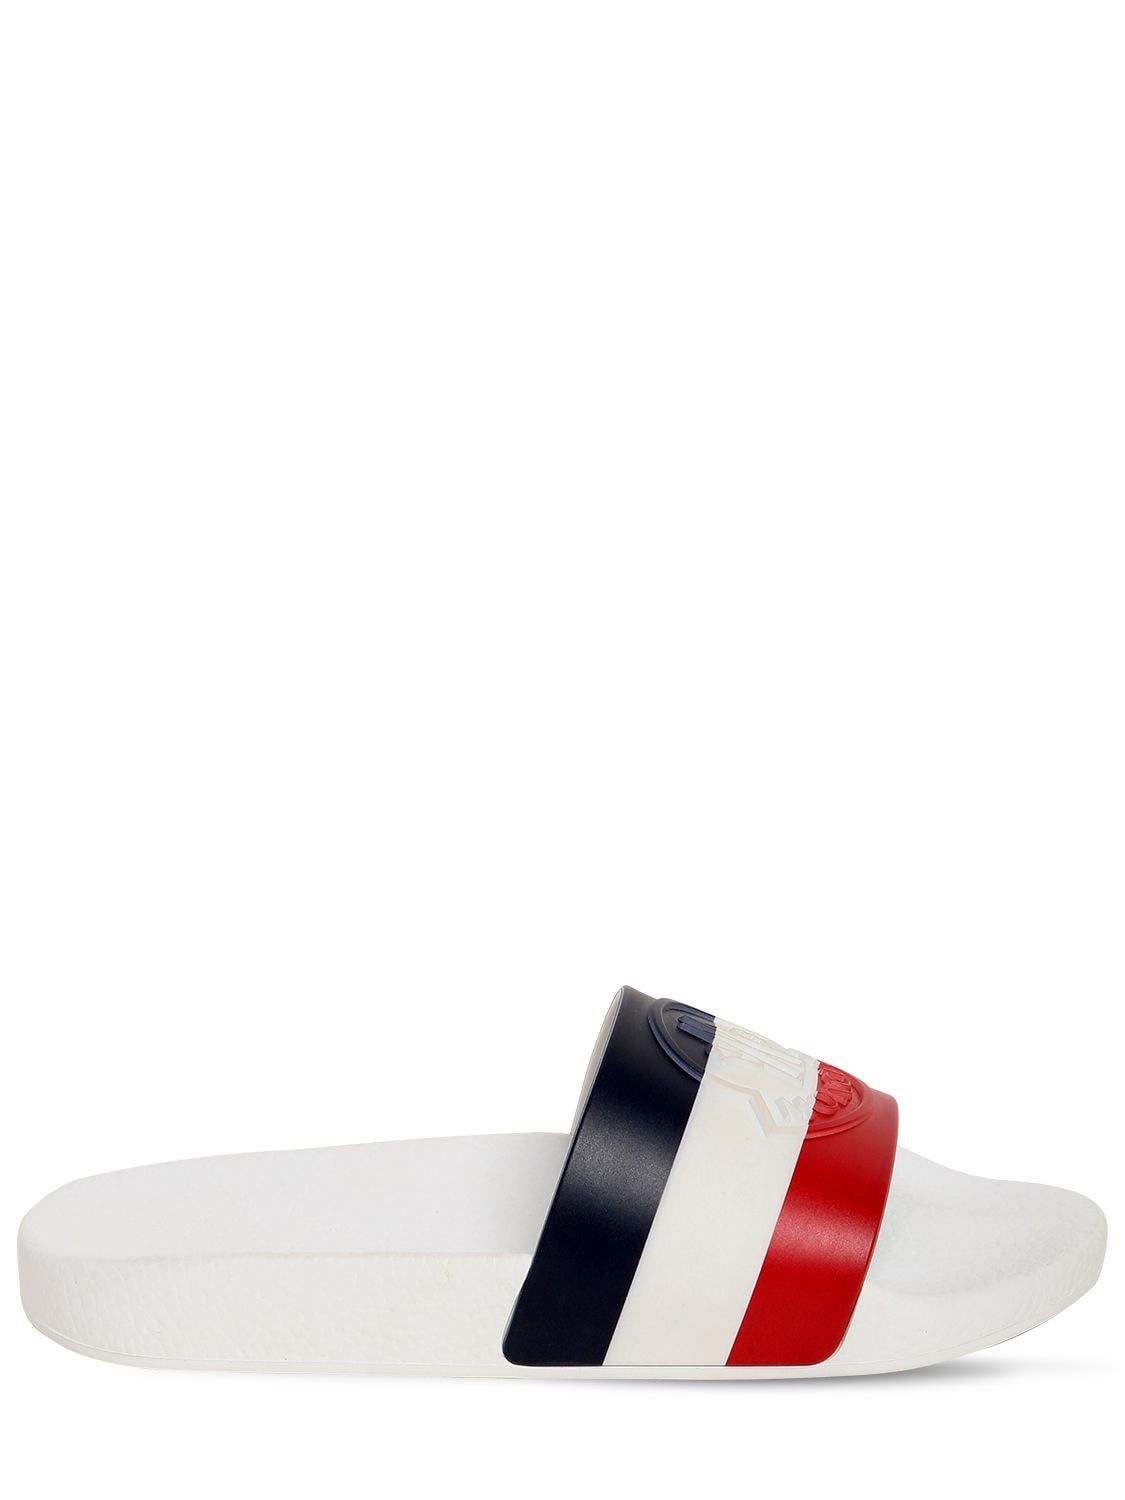 Moncler Striped Rubber Slide Sandals In White